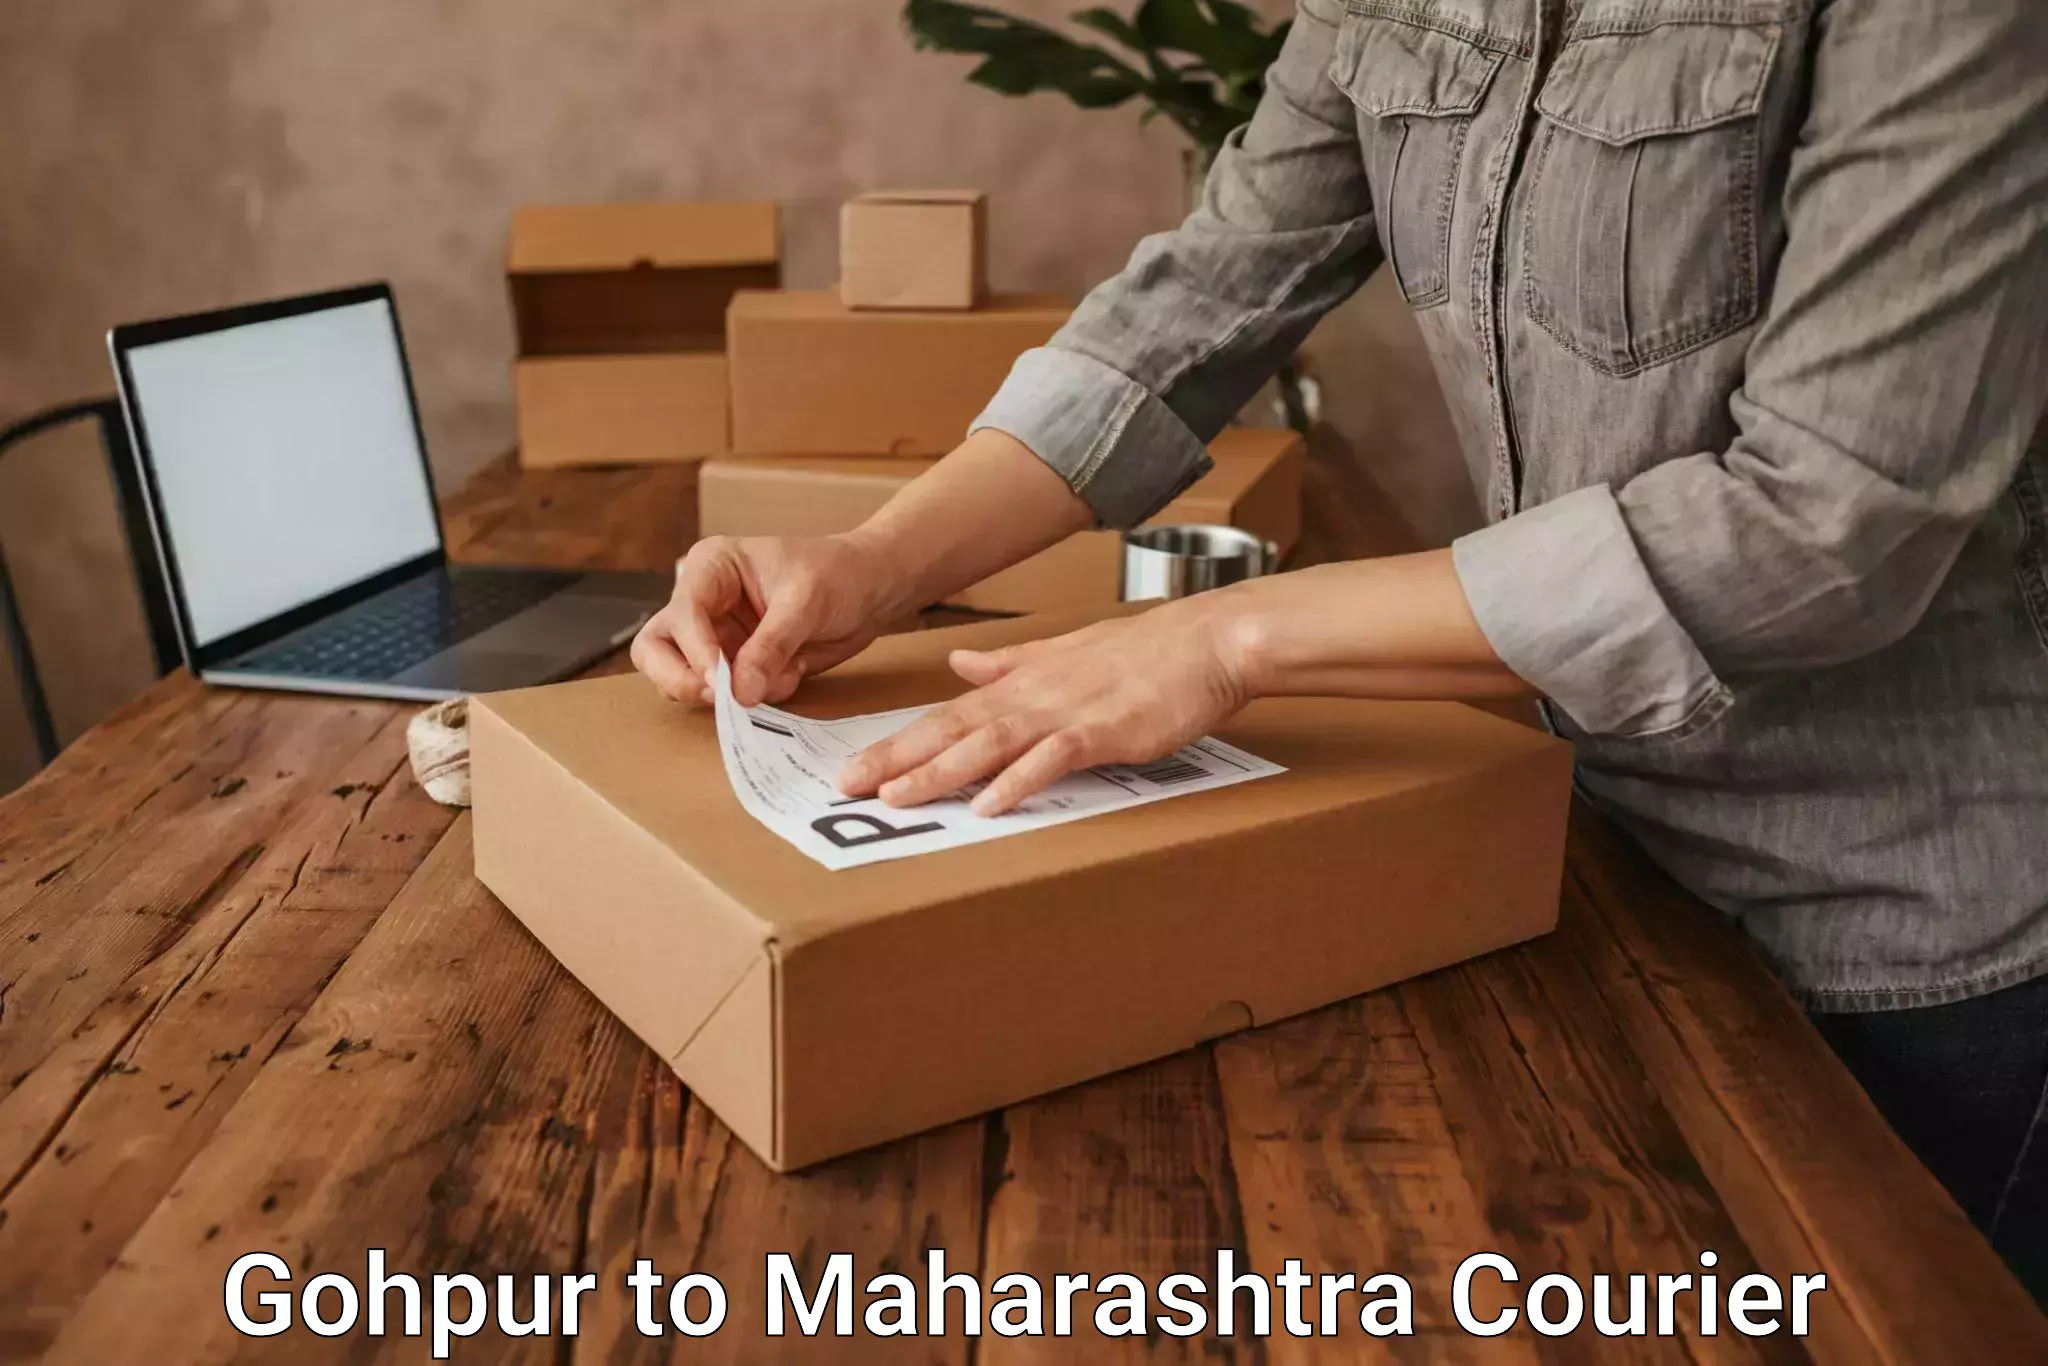 Optimized delivery routes in Gohpur to Shivajinagar